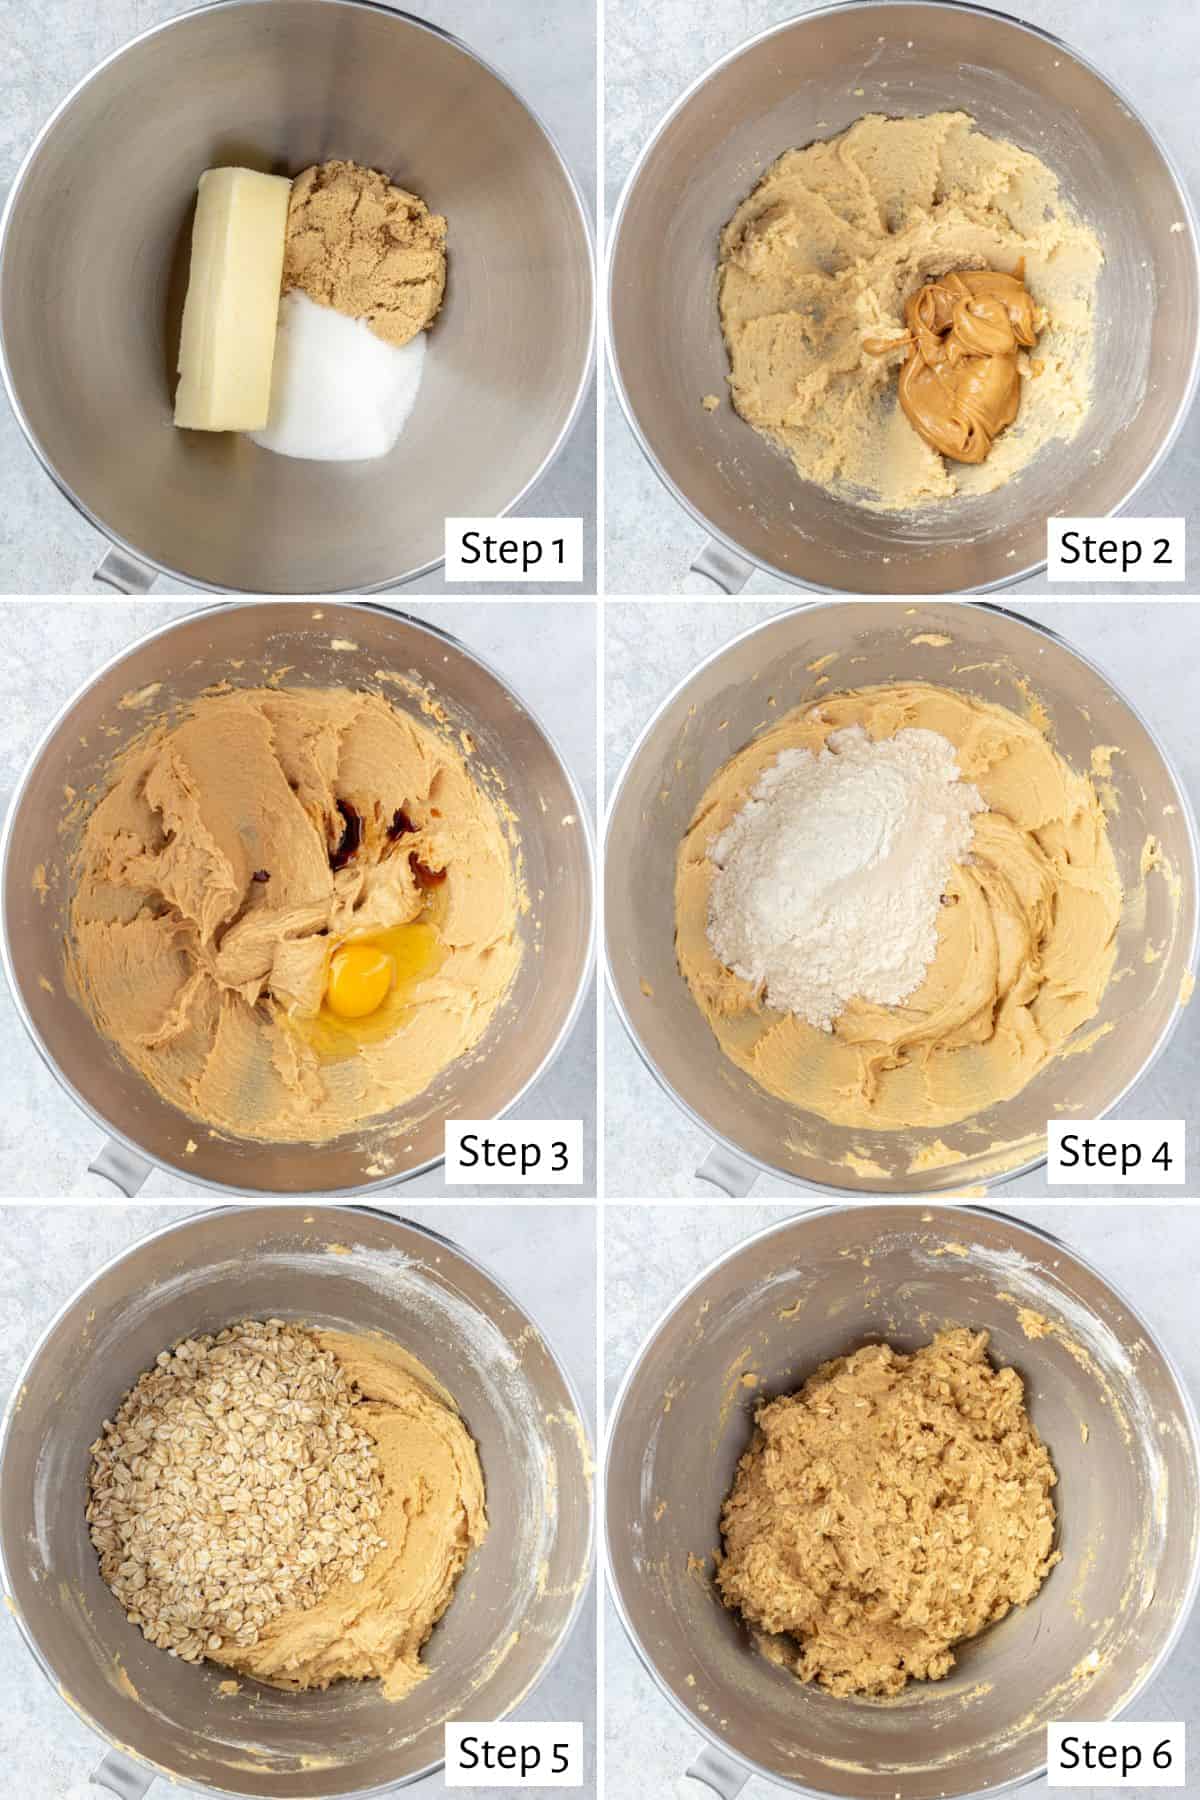 6-image collage: 1 - Butter, granulated sugar, and light brown sugar in the bowl of a stand mixer before creaming together; 2 - After creaming with peanut butter added; 3 - After the peanut butter is incorporated with egg and vanilla added; 4 - After mixing with dry ingredients added; 5 - After mixing with oats added; 6 - After combining